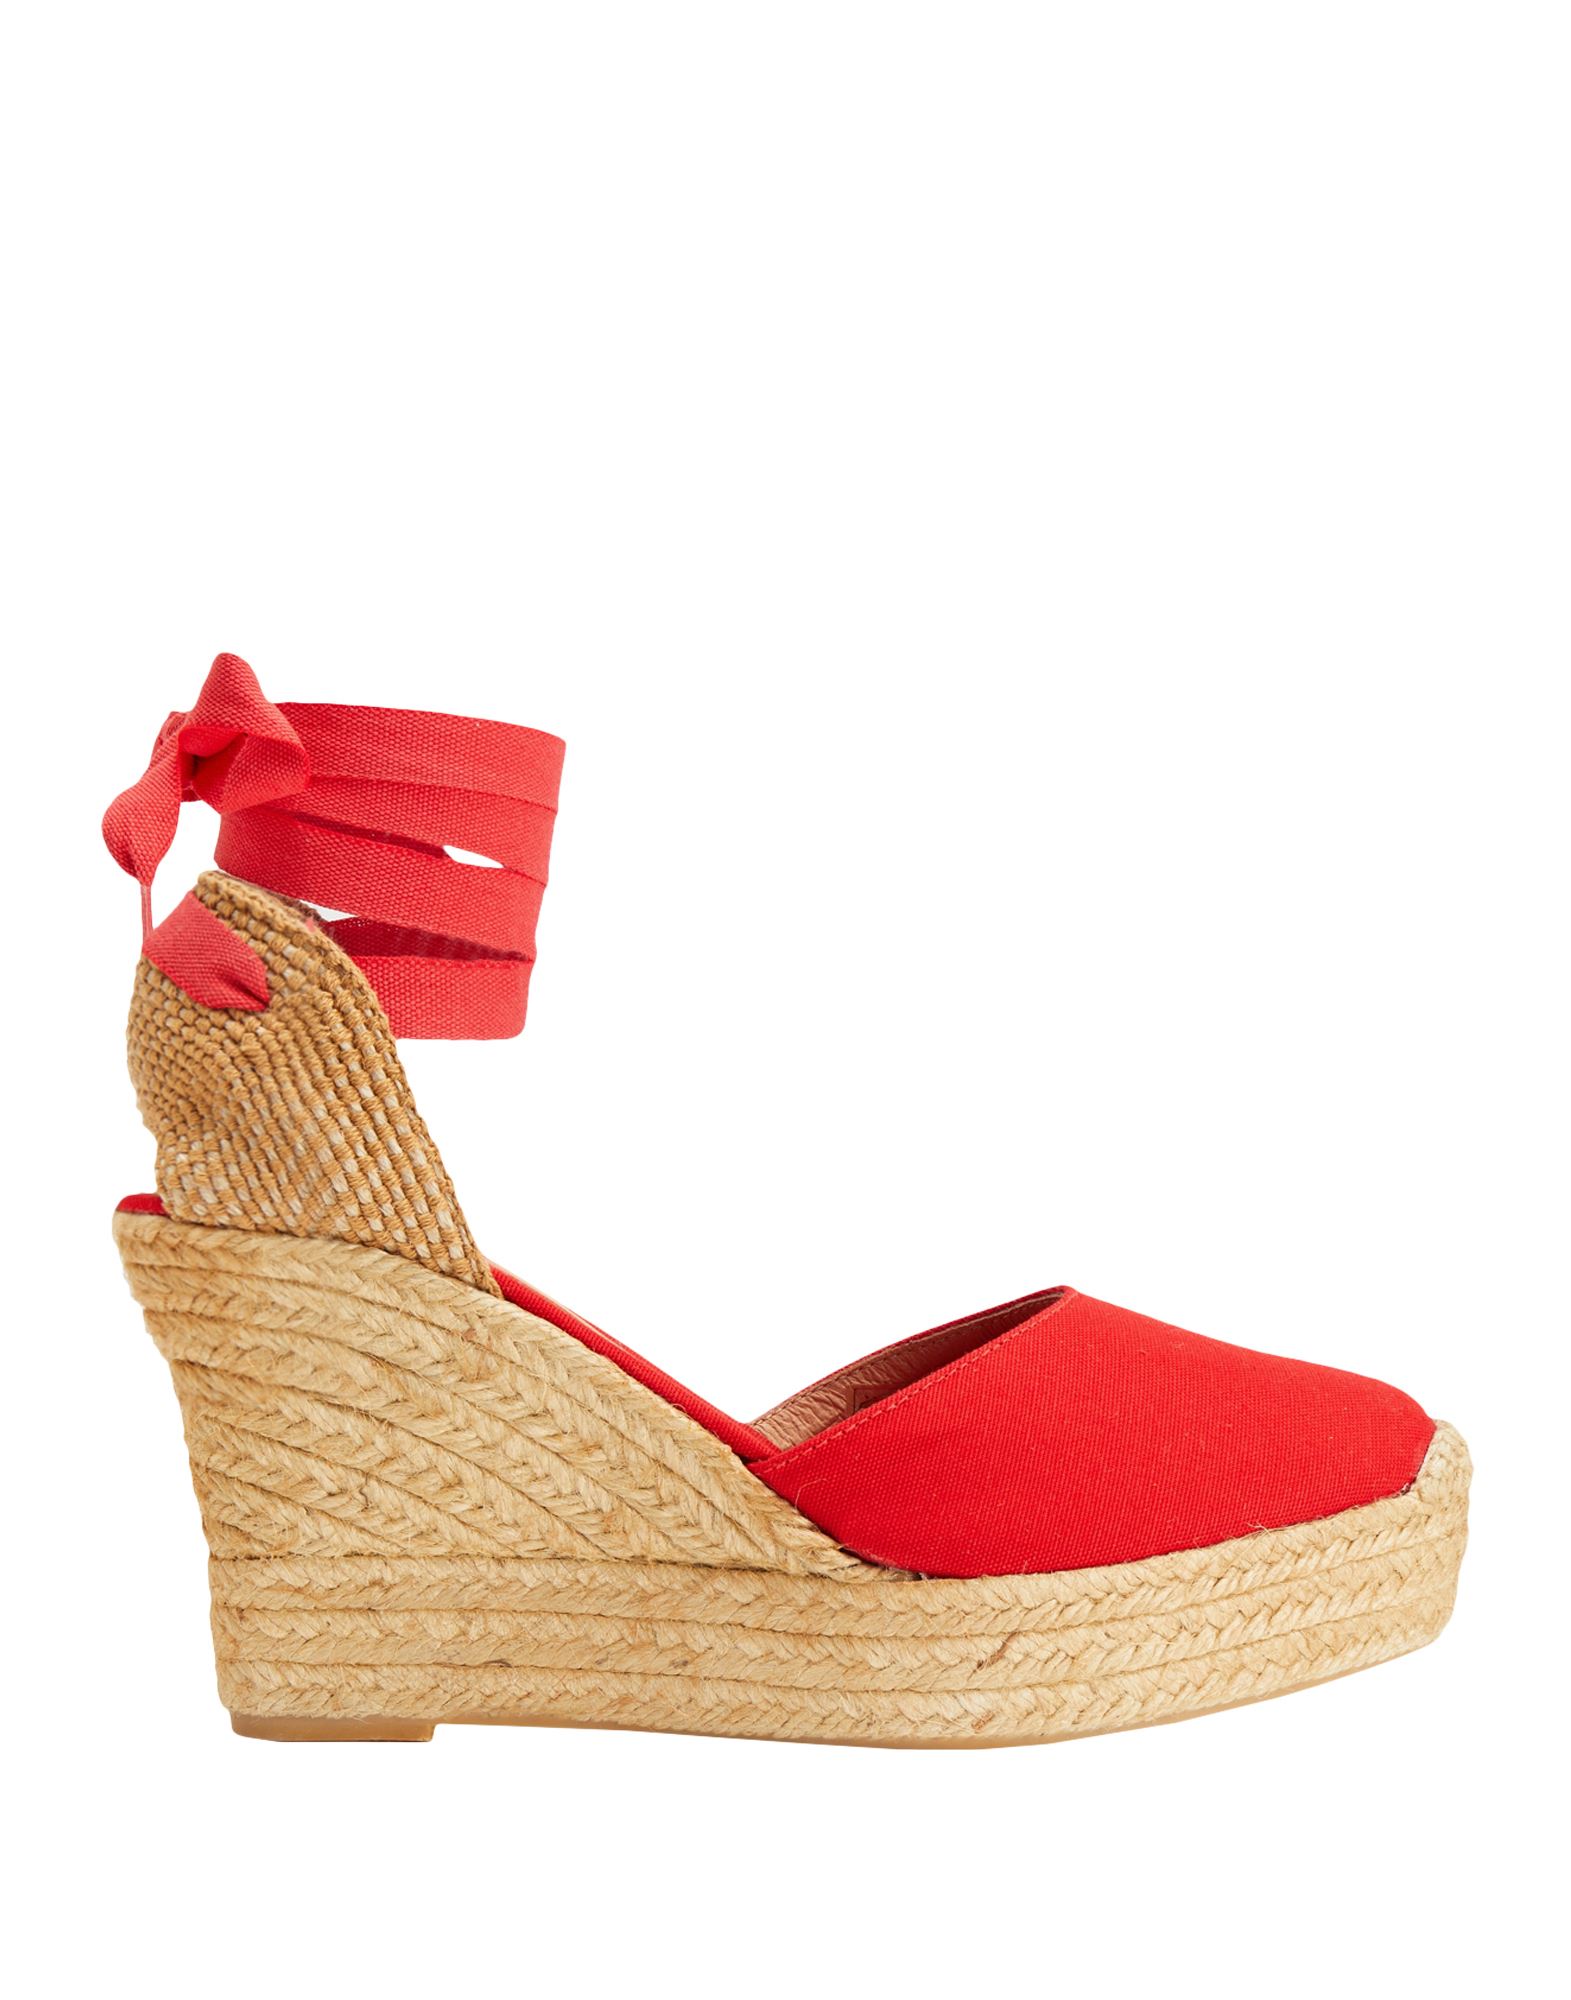 8 By Yoox Espadrilles In Red